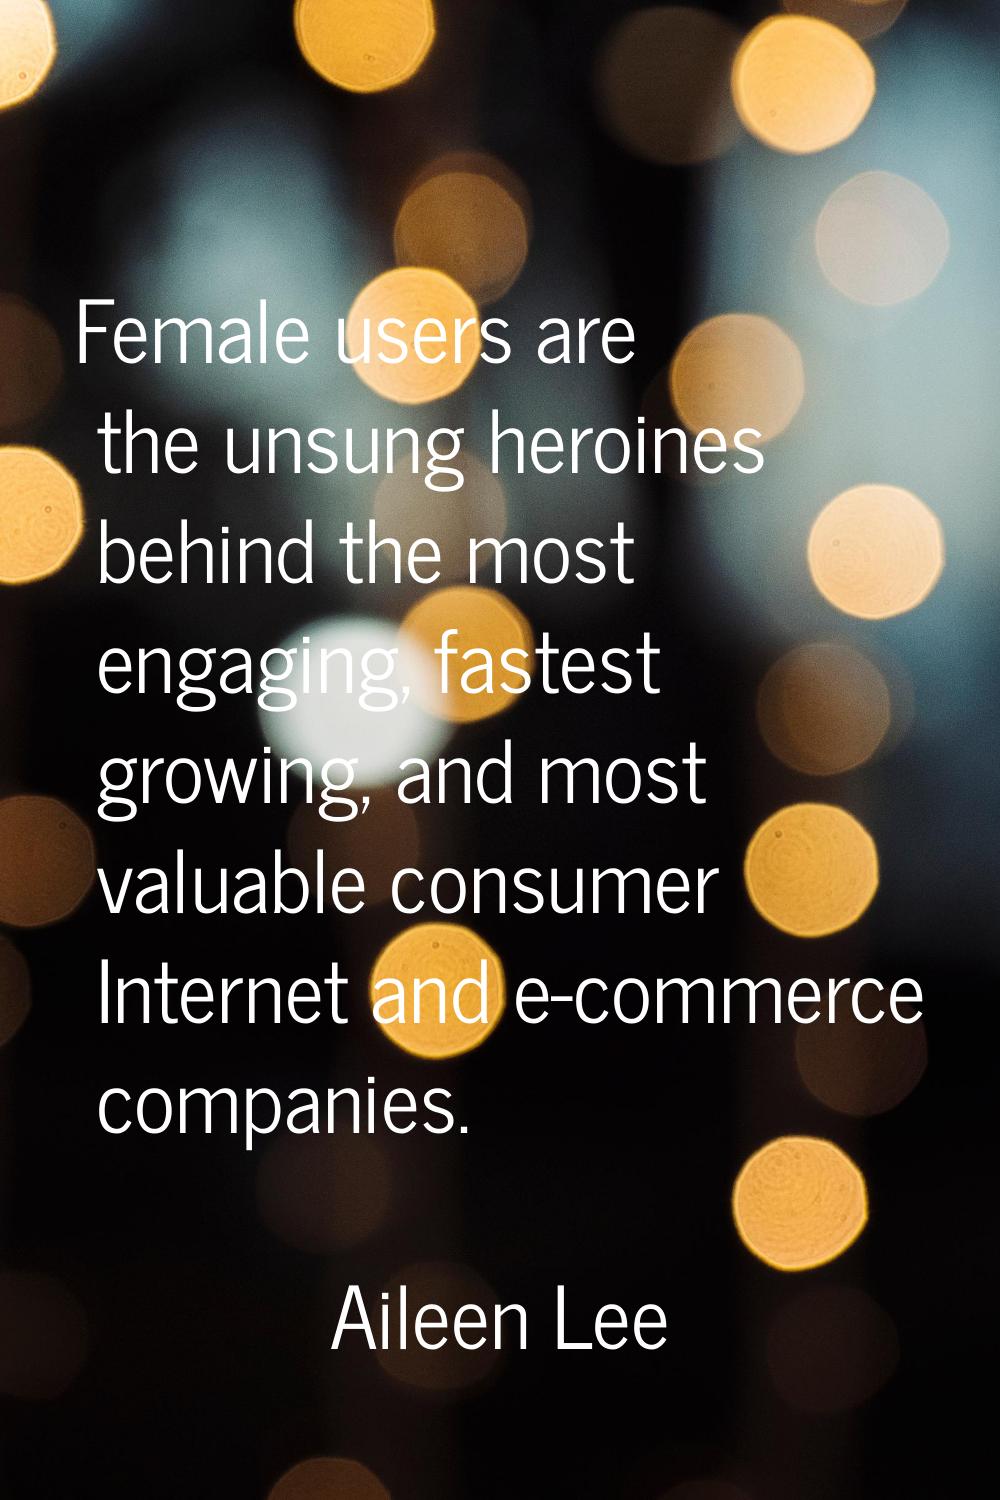 Female users are the unsung heroines behind the most engaging, fastest growing, and most valuable c